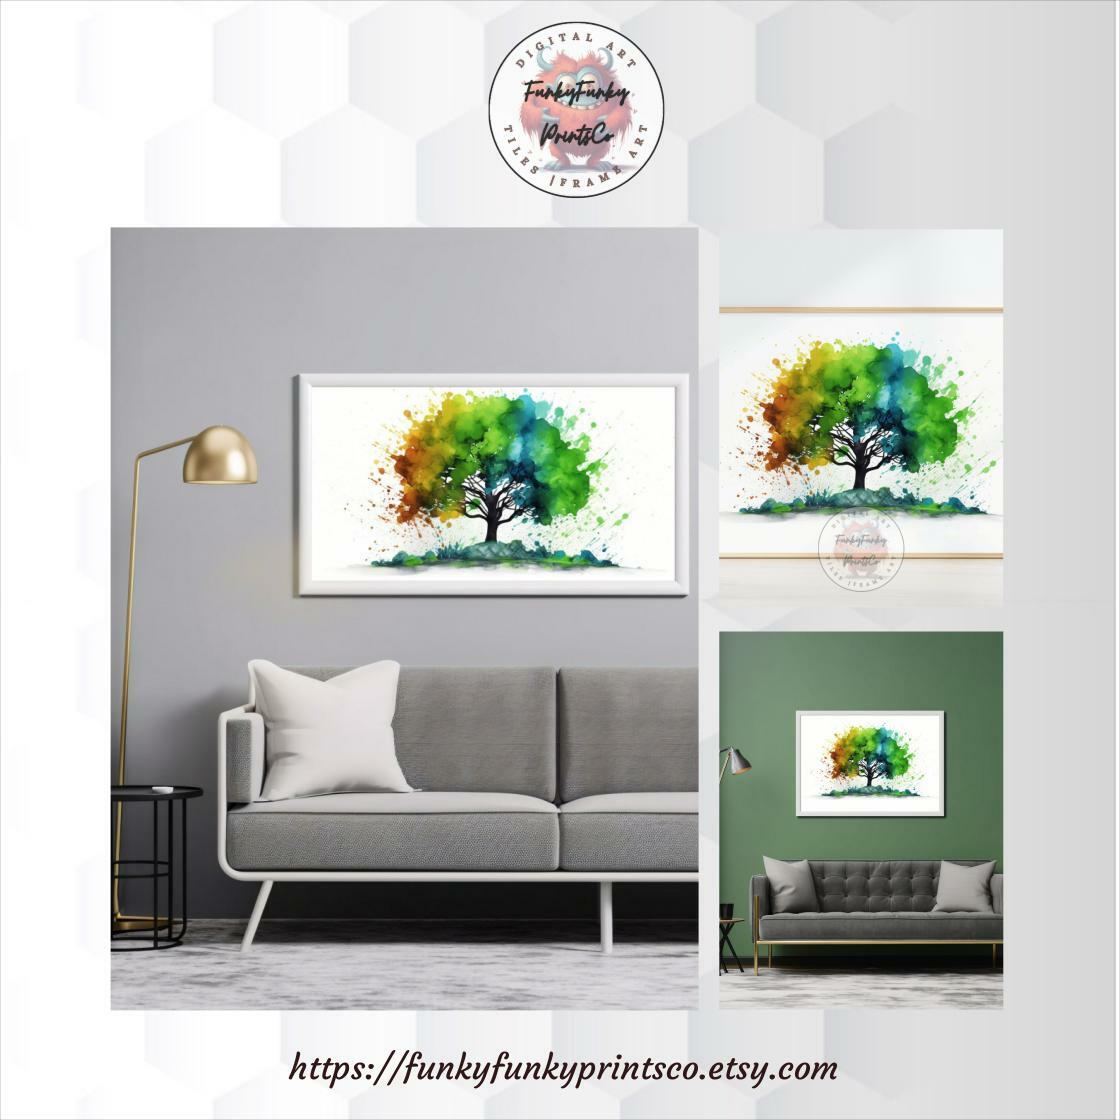 #SimpleTreeArt #LandscapeArtwork Watercolor Trees Clipart, Painted Colorful Tree Art, Tree, Leaves Illustrations, JPG Graphics, Instant Download for Commercial Use
etsy.me/3T5X1Xc